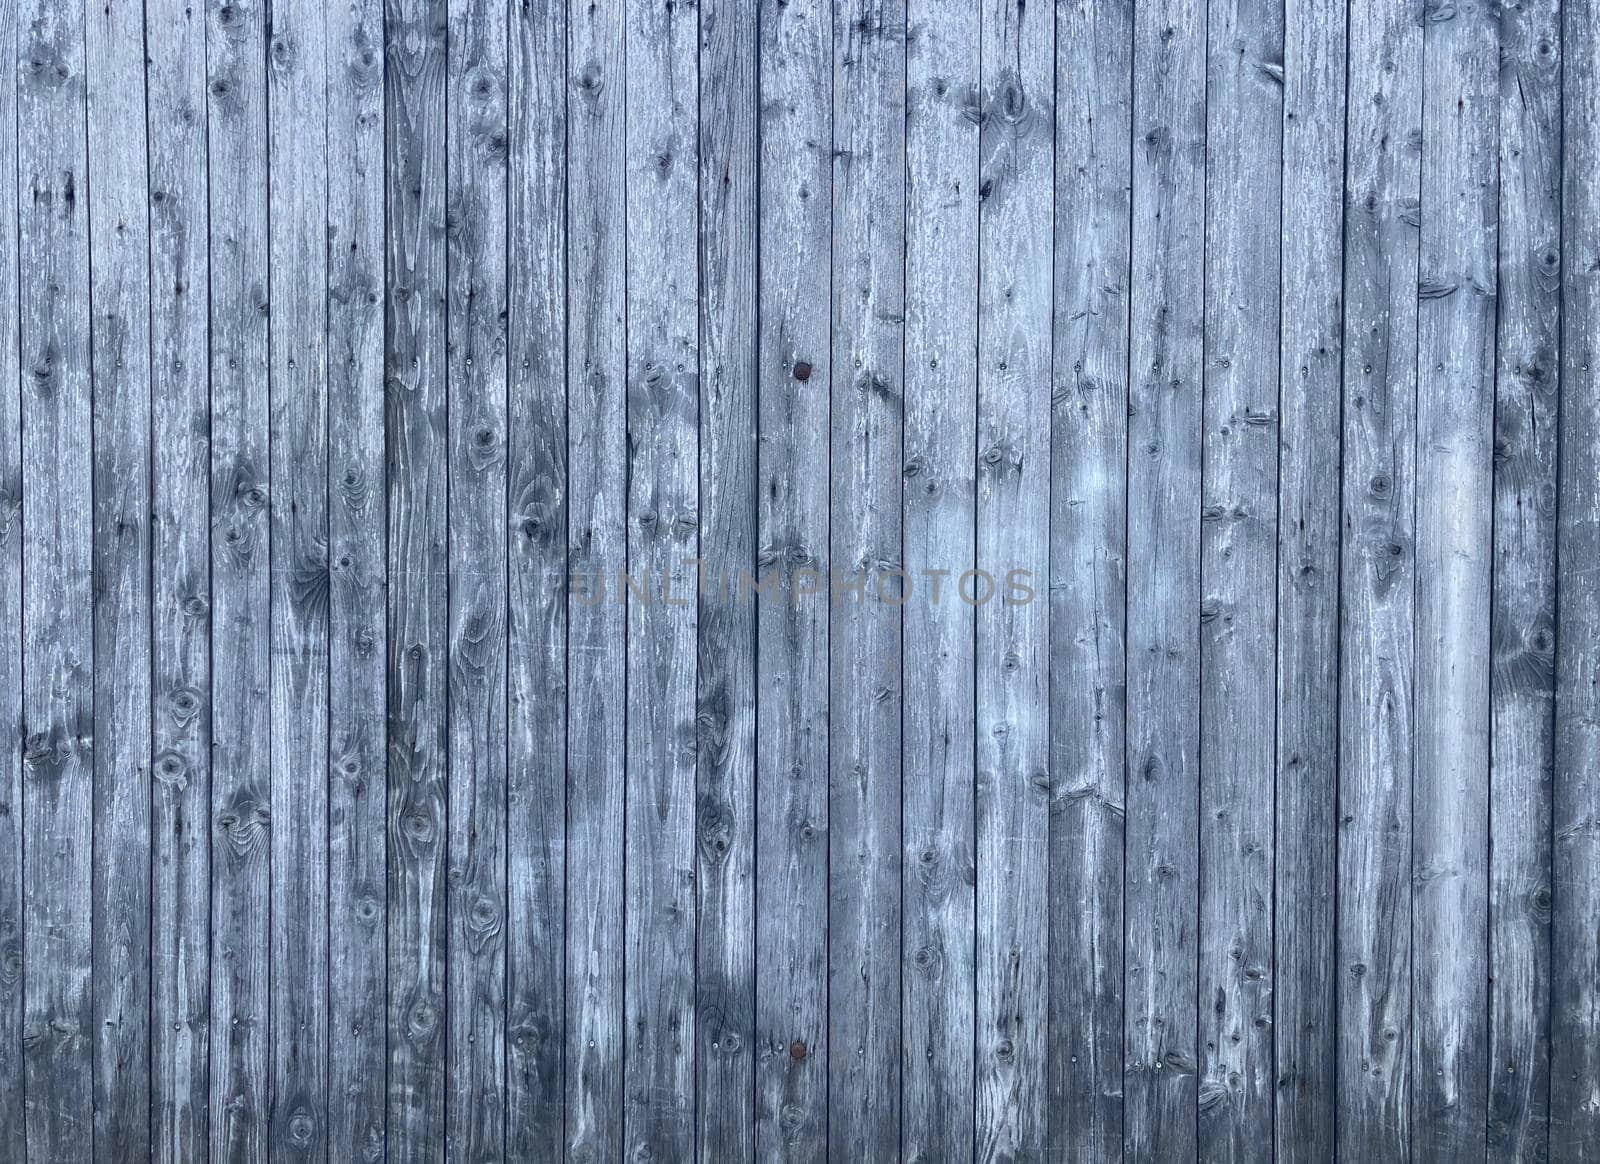 Old antique wooden planks texture. Outdoor photo